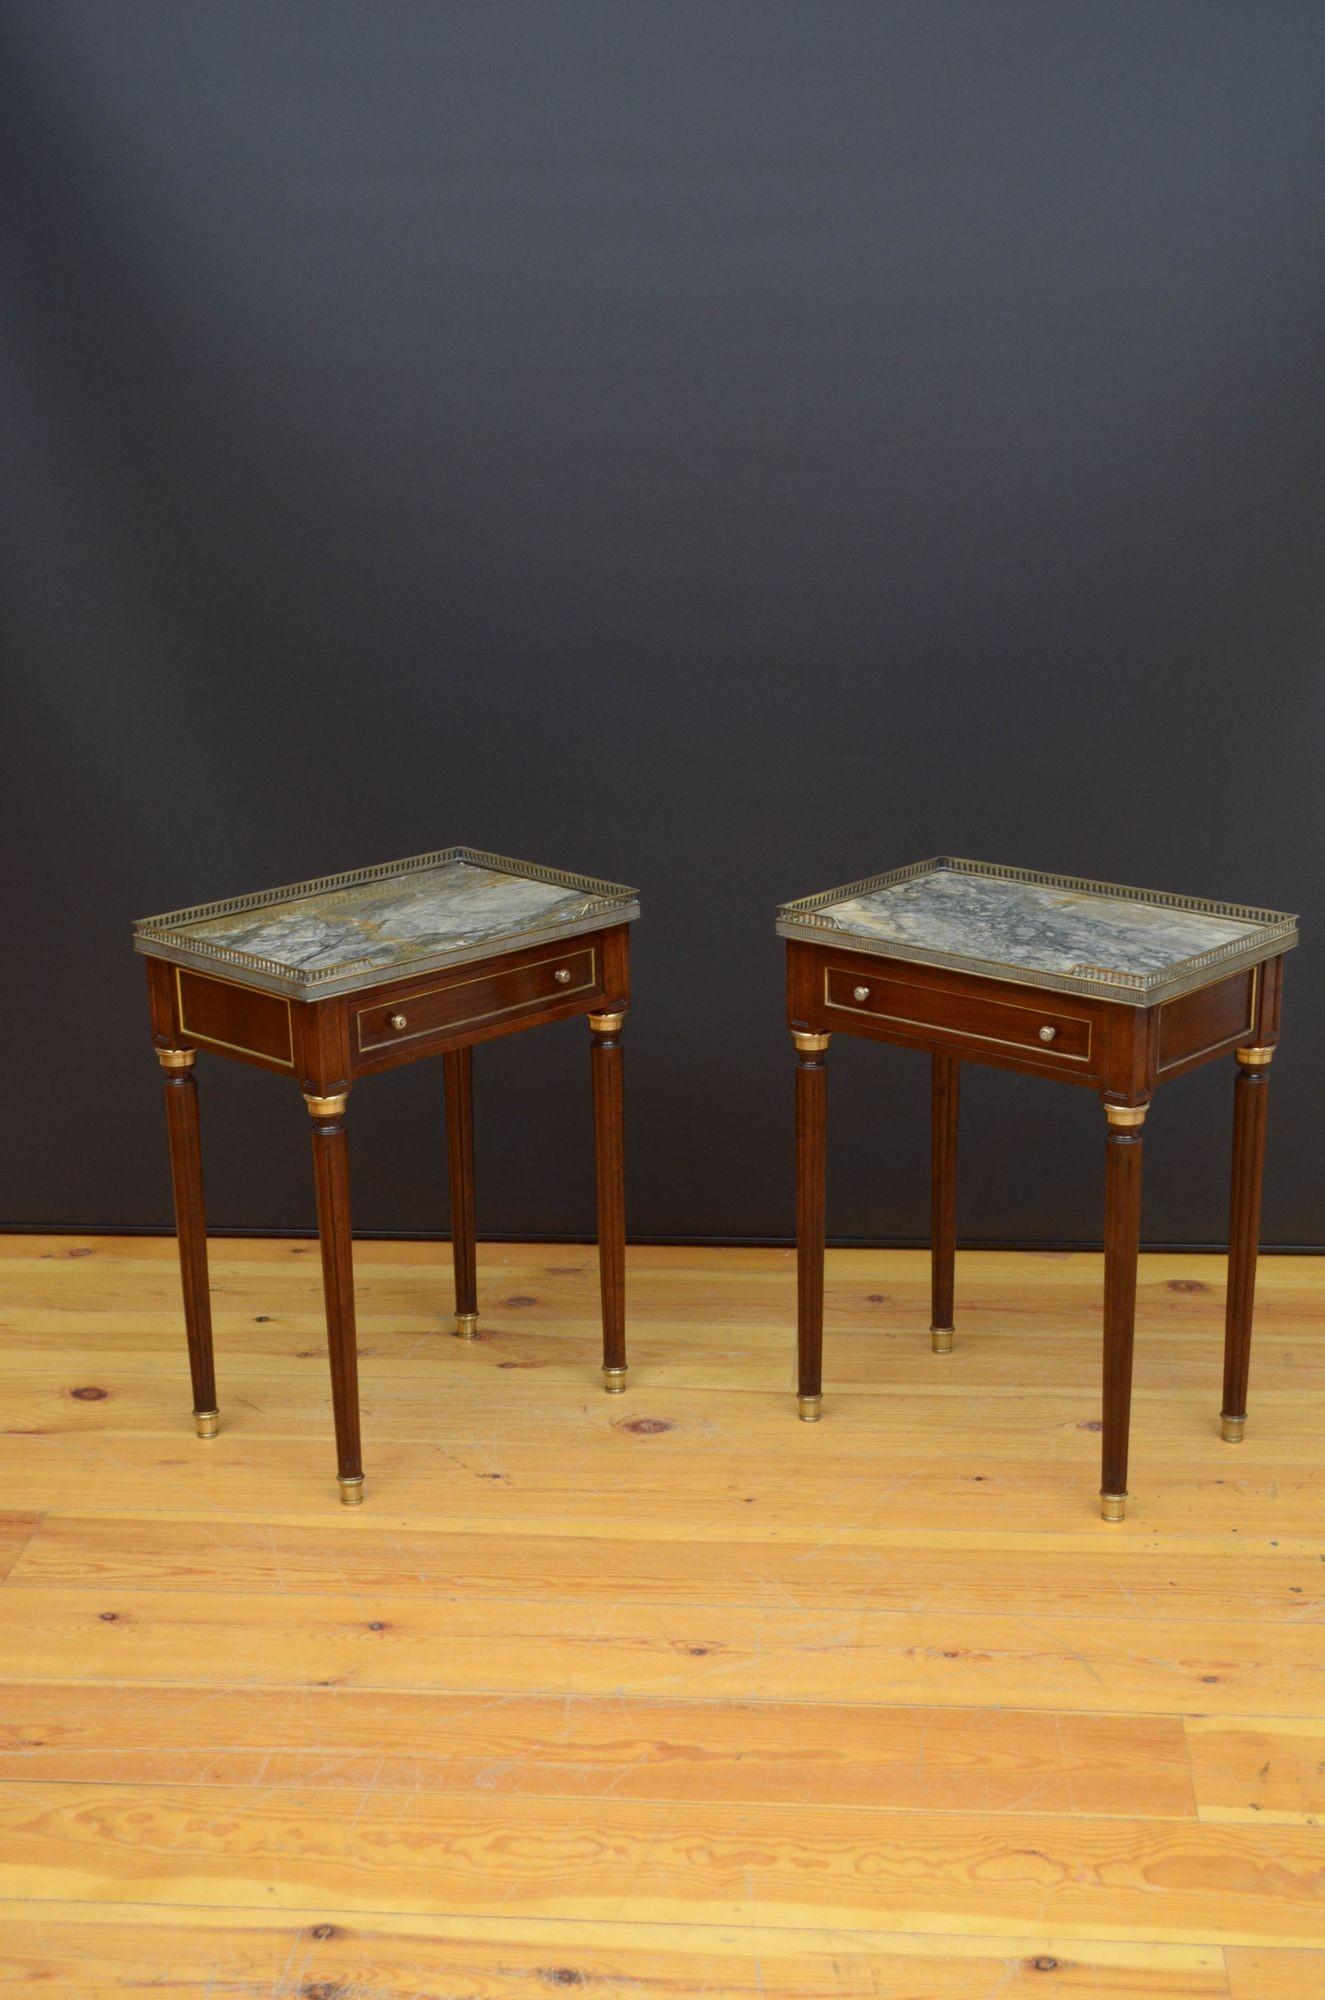 Sn5334 Pair of decorative mahogany tables, each having original marble top with brass gallery above a moulded drawer fitted with original brass handles, standing on turned and reeded legs terminating in brass cups, all with decorative brass